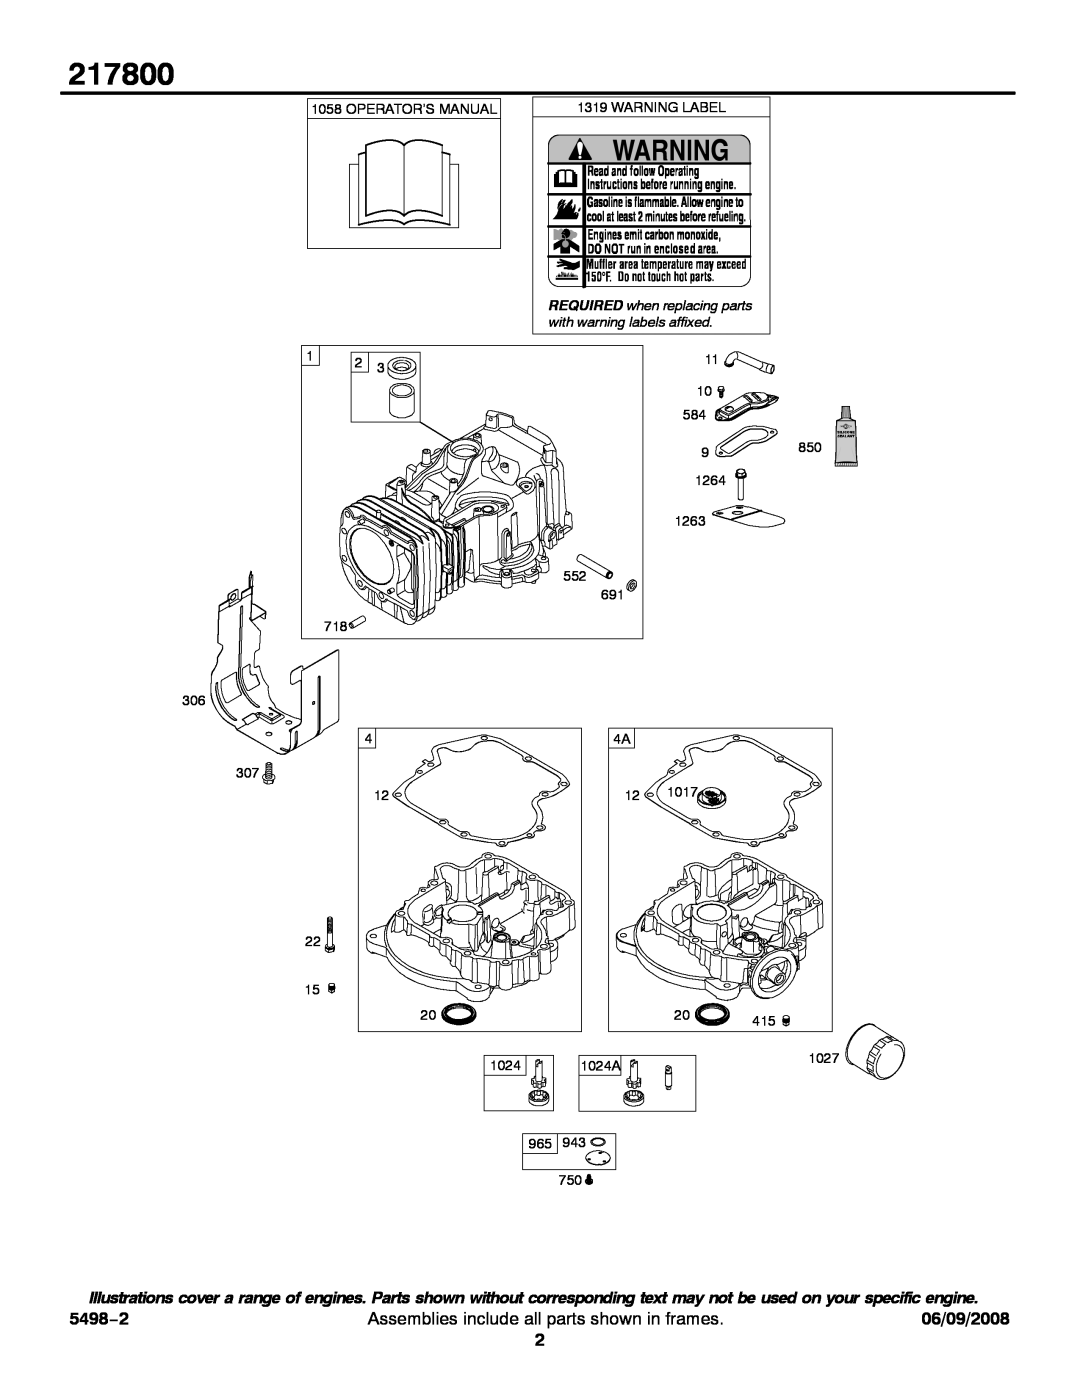 Briggs & Stratton 217800 service manual 5498−2, Assemblies include all parts shown in frames, 06/09/2008 